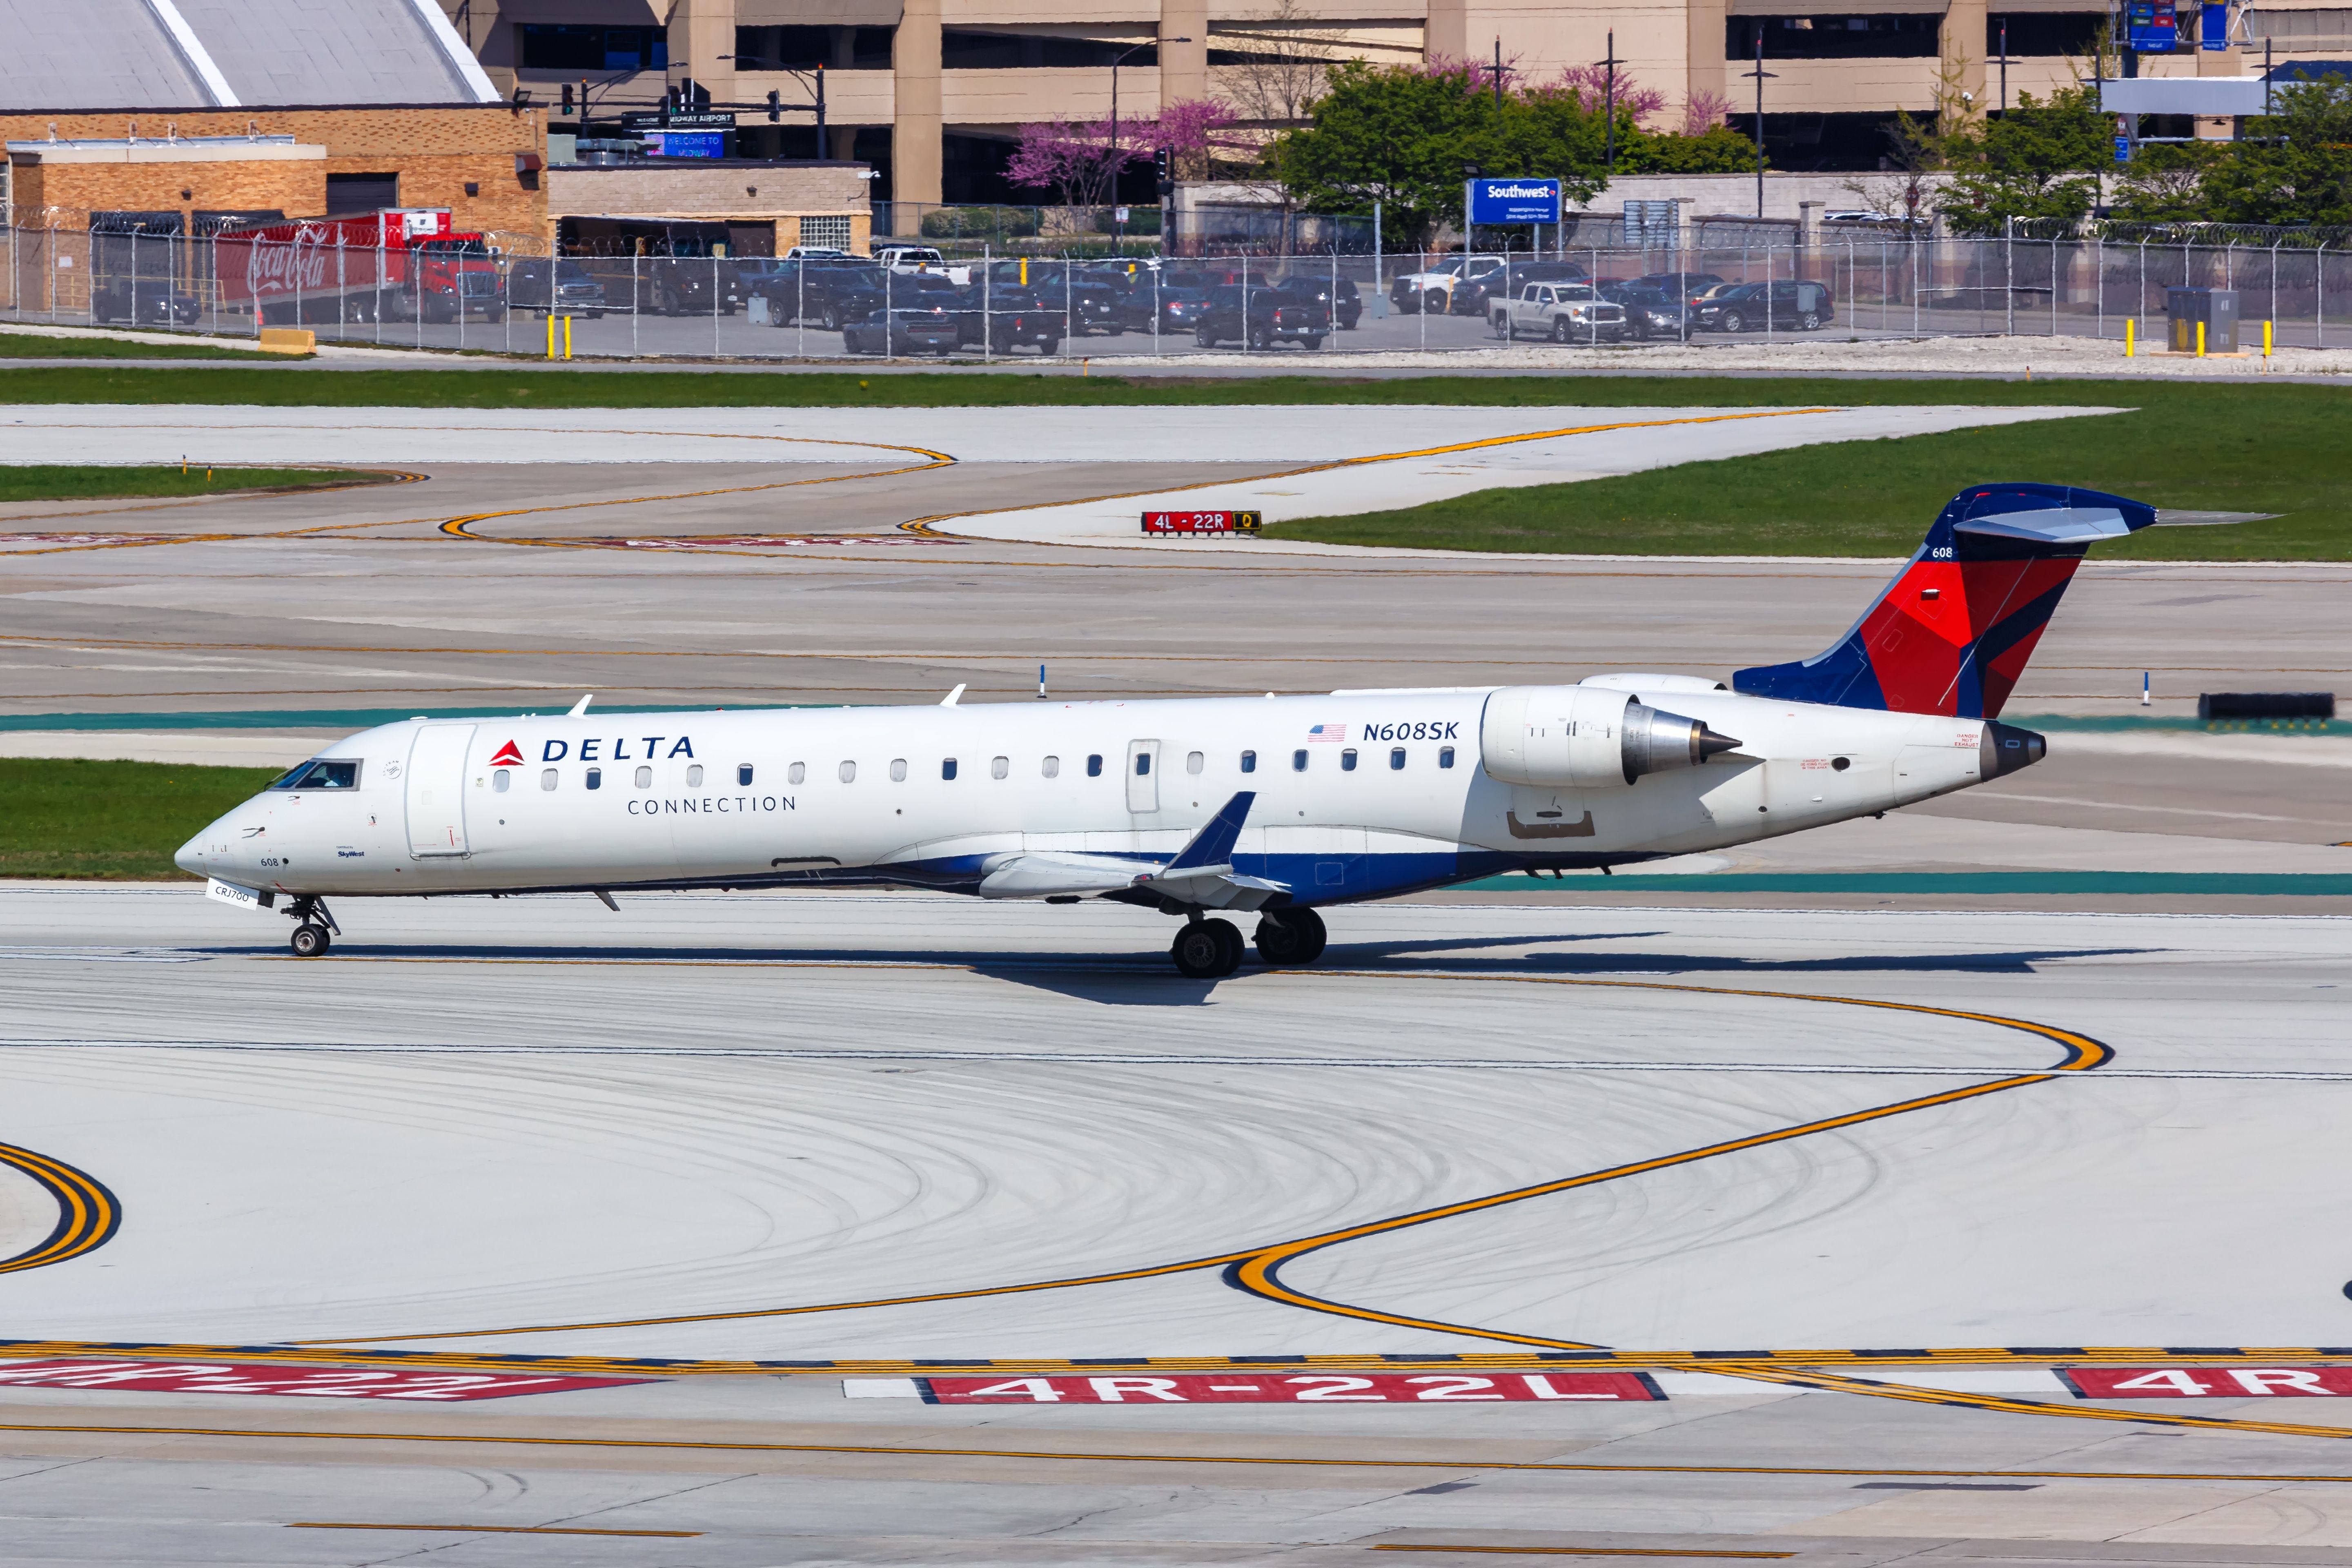 Delta Connection (SkyWest Airlines) Bombardier CRJ-700 N608SK.